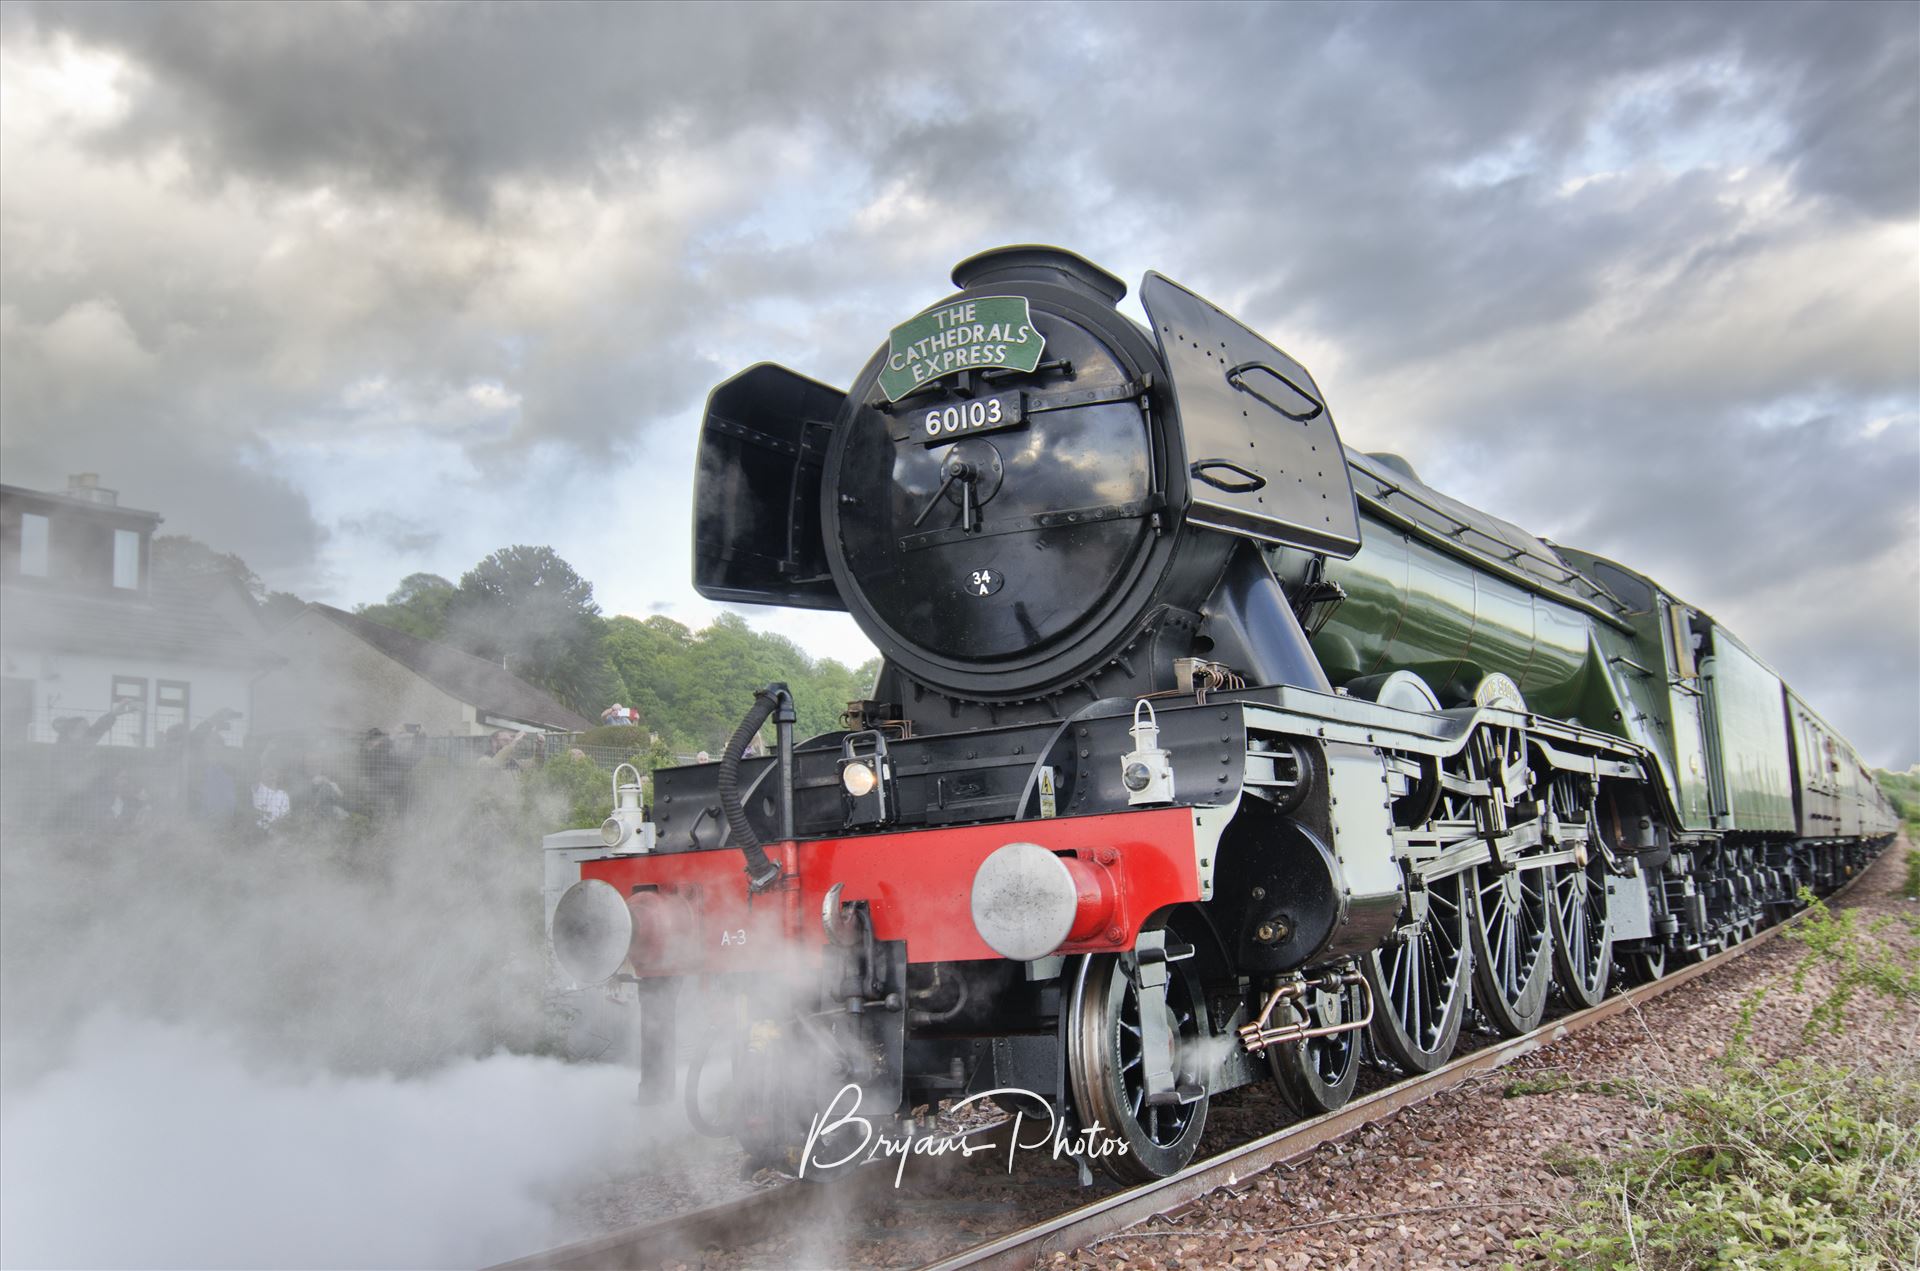 The Flying Scotsman A colour photograph of the world famous Flying Scotsman passing through Newmills as part of it's tour around Fife and Forth Valley by Bryans Photos